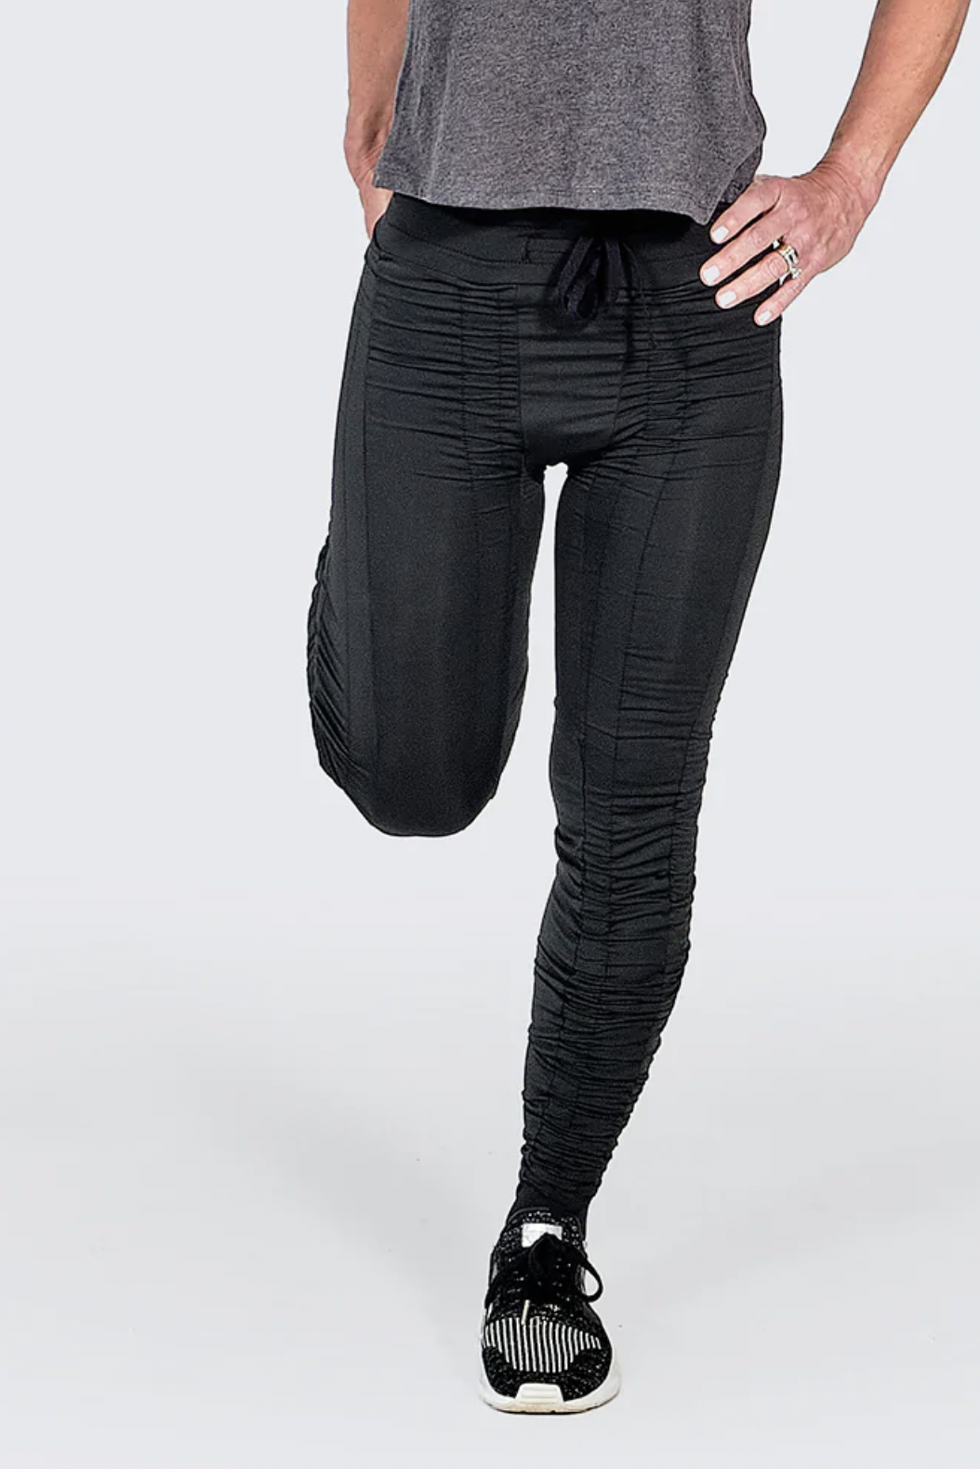 AGOGIE Resistance Band Leggings :: Are they Worth the Hype?